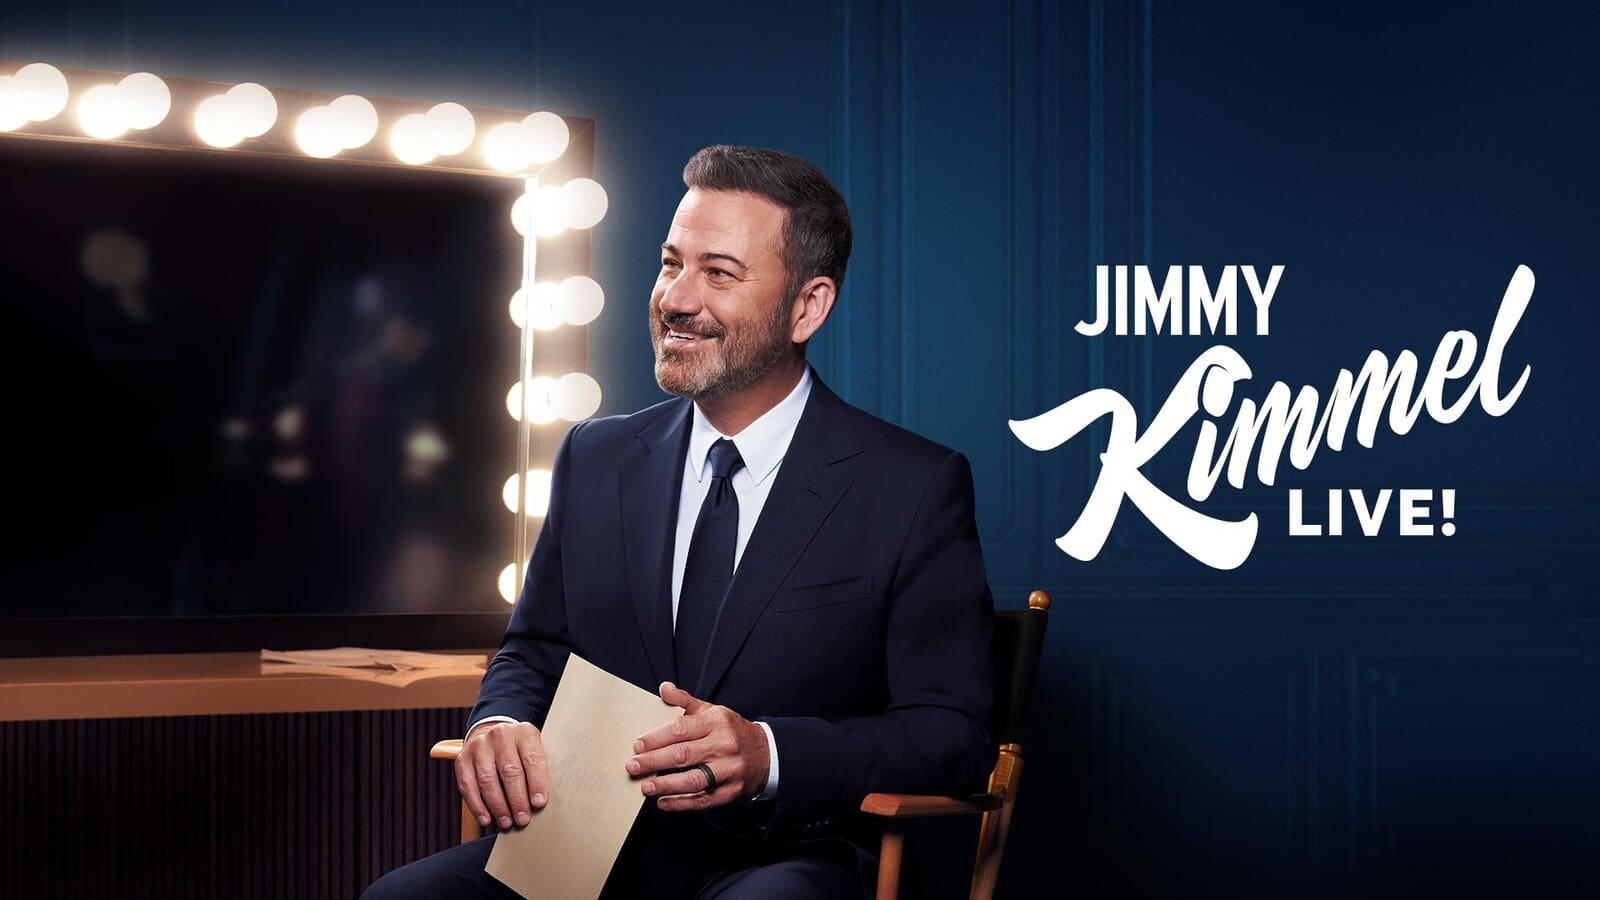 Jimmy Kimmel Hints At Late Night Show Exit: “I Think This Is My Final Contract”